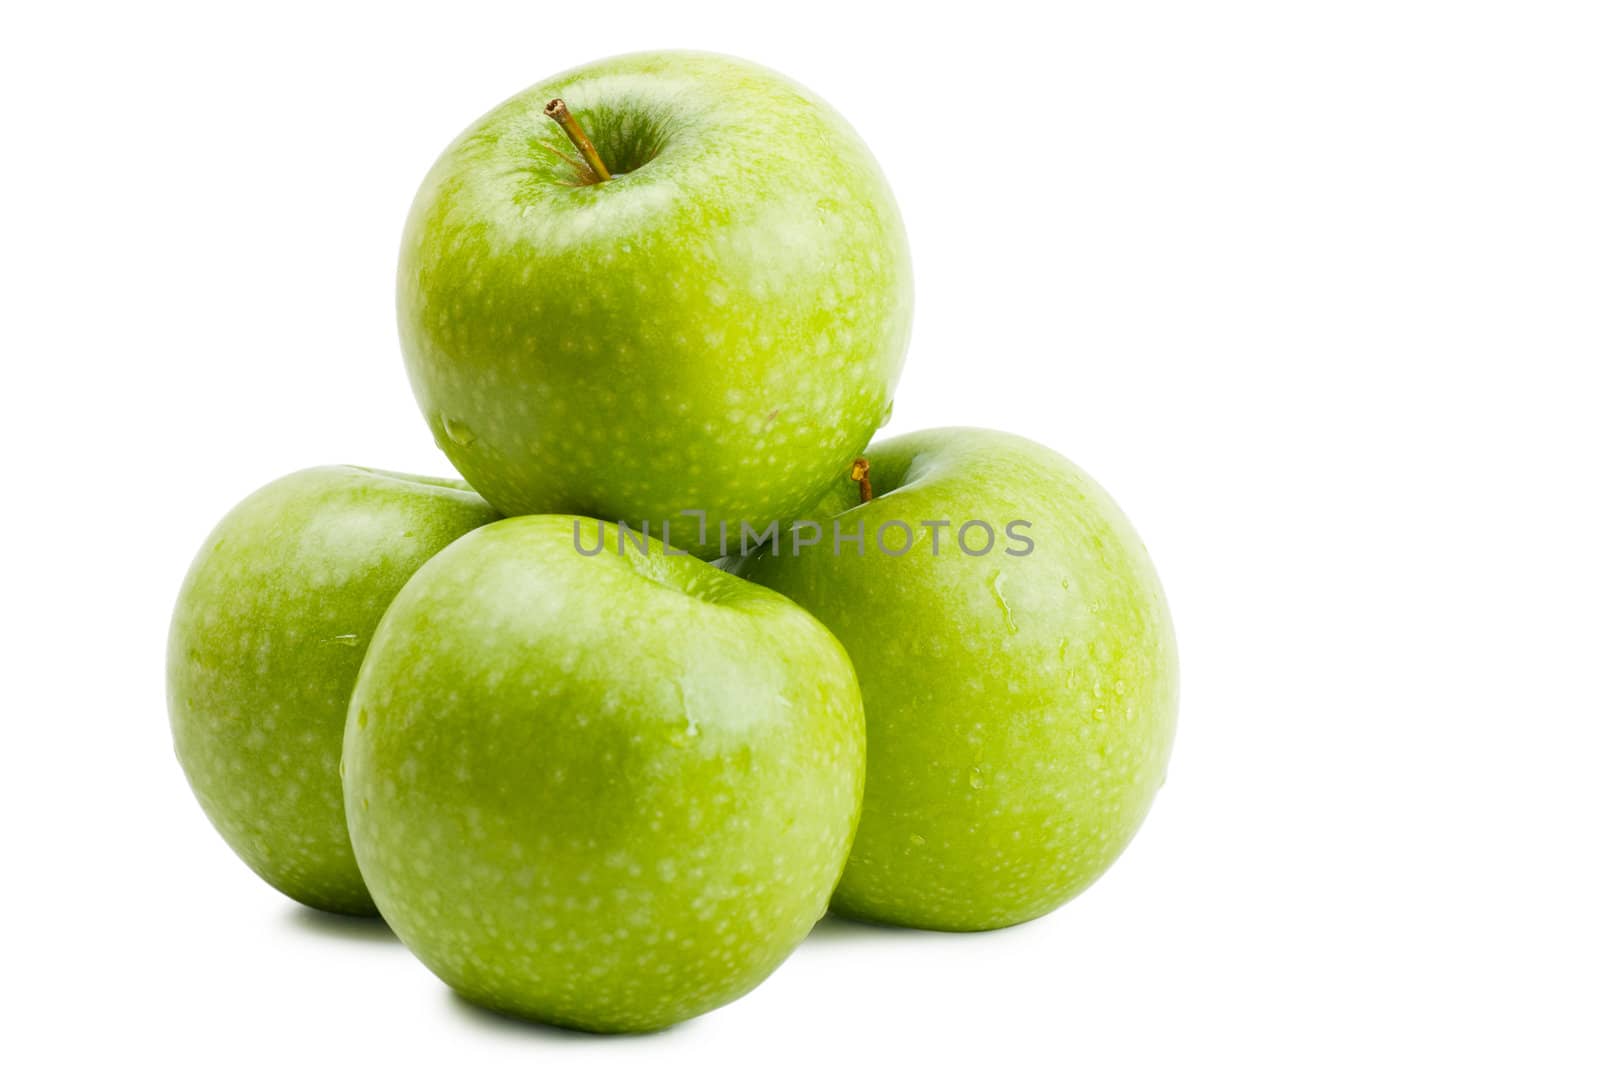 Big green apples isolated over white background